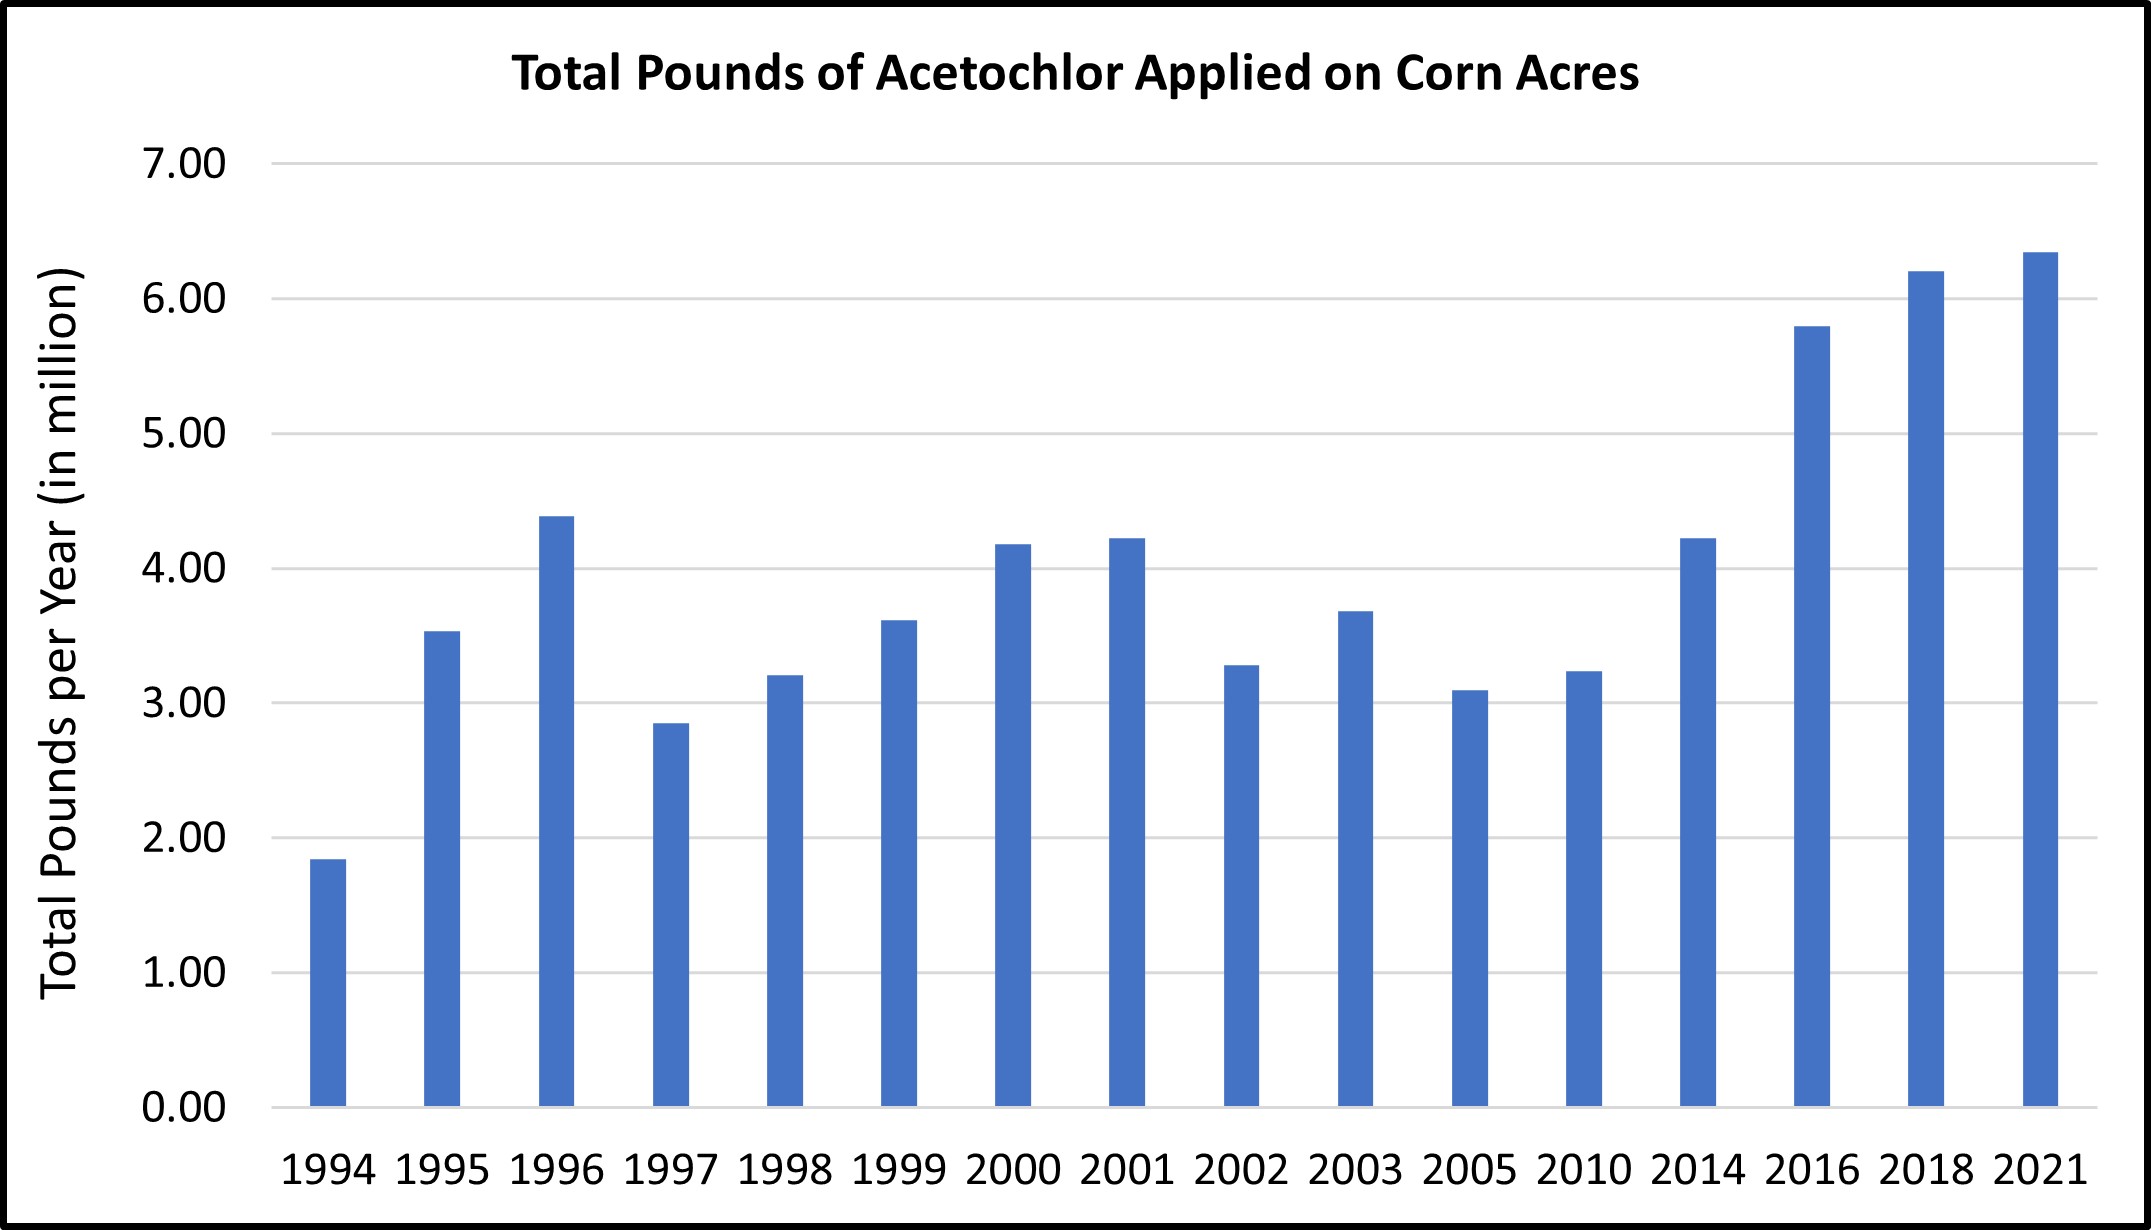 Bar graph illustrating the total pounds of acetochlor applied on corn acres in Minnesota. Values varied between 1.8 and 6.4 million pounds  from 1994 through 2016 according to the National Agricultural Statistics Service.